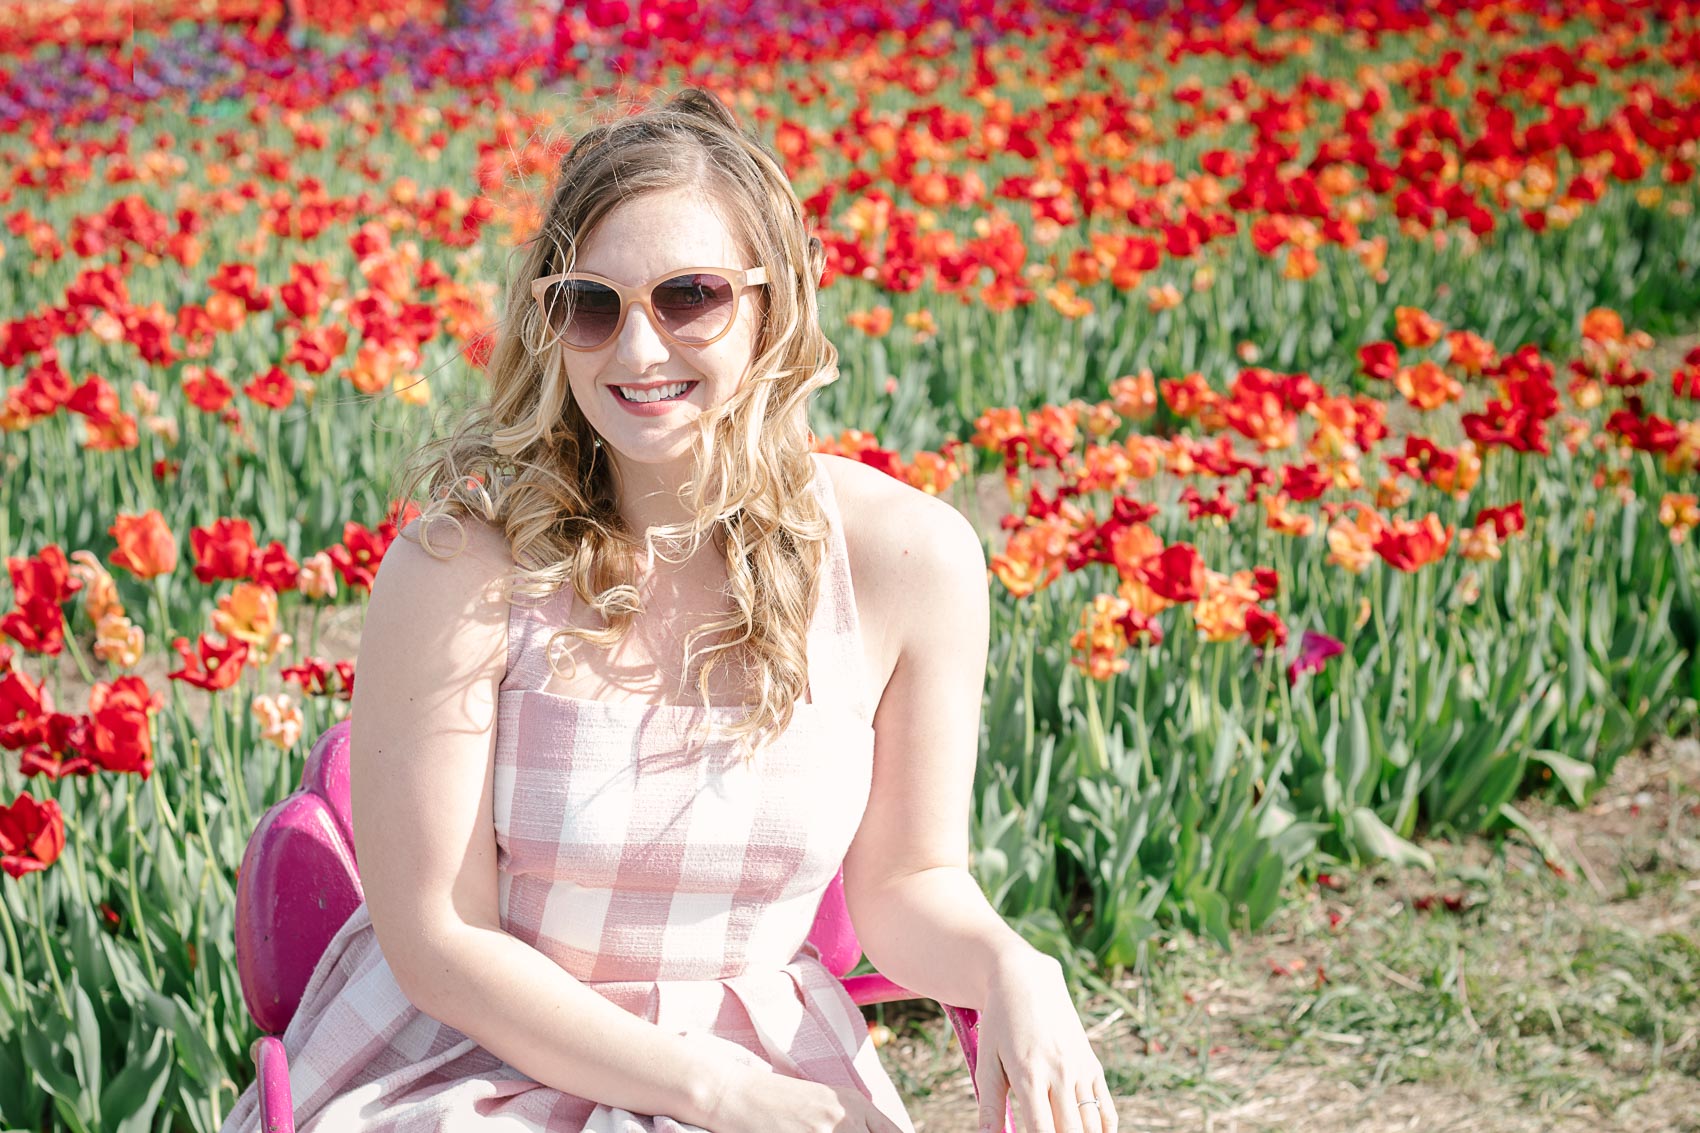 Flower picking in a pink Gal Meets Glam Collection pink gingham dress at Burnside Farms in Nokesville, Virginia | pictures of tulips, castaner wedges, summer dress